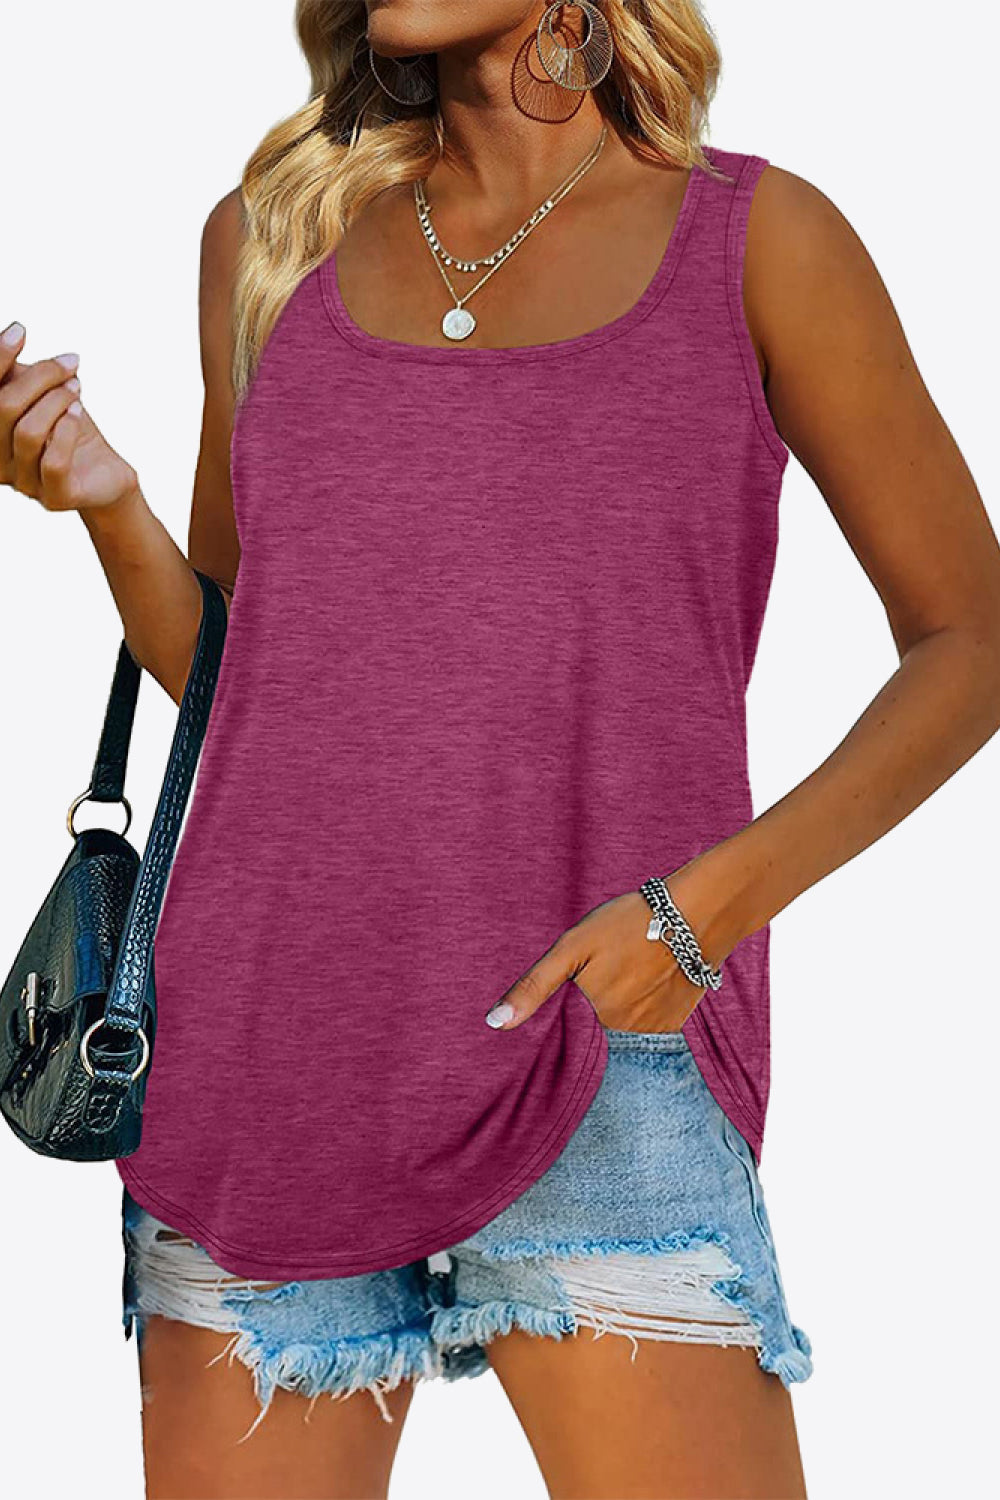 Stormy Sky Solid Viscose Tank Top | Hypoallergenic - Allergy Friendly - Naturally Free